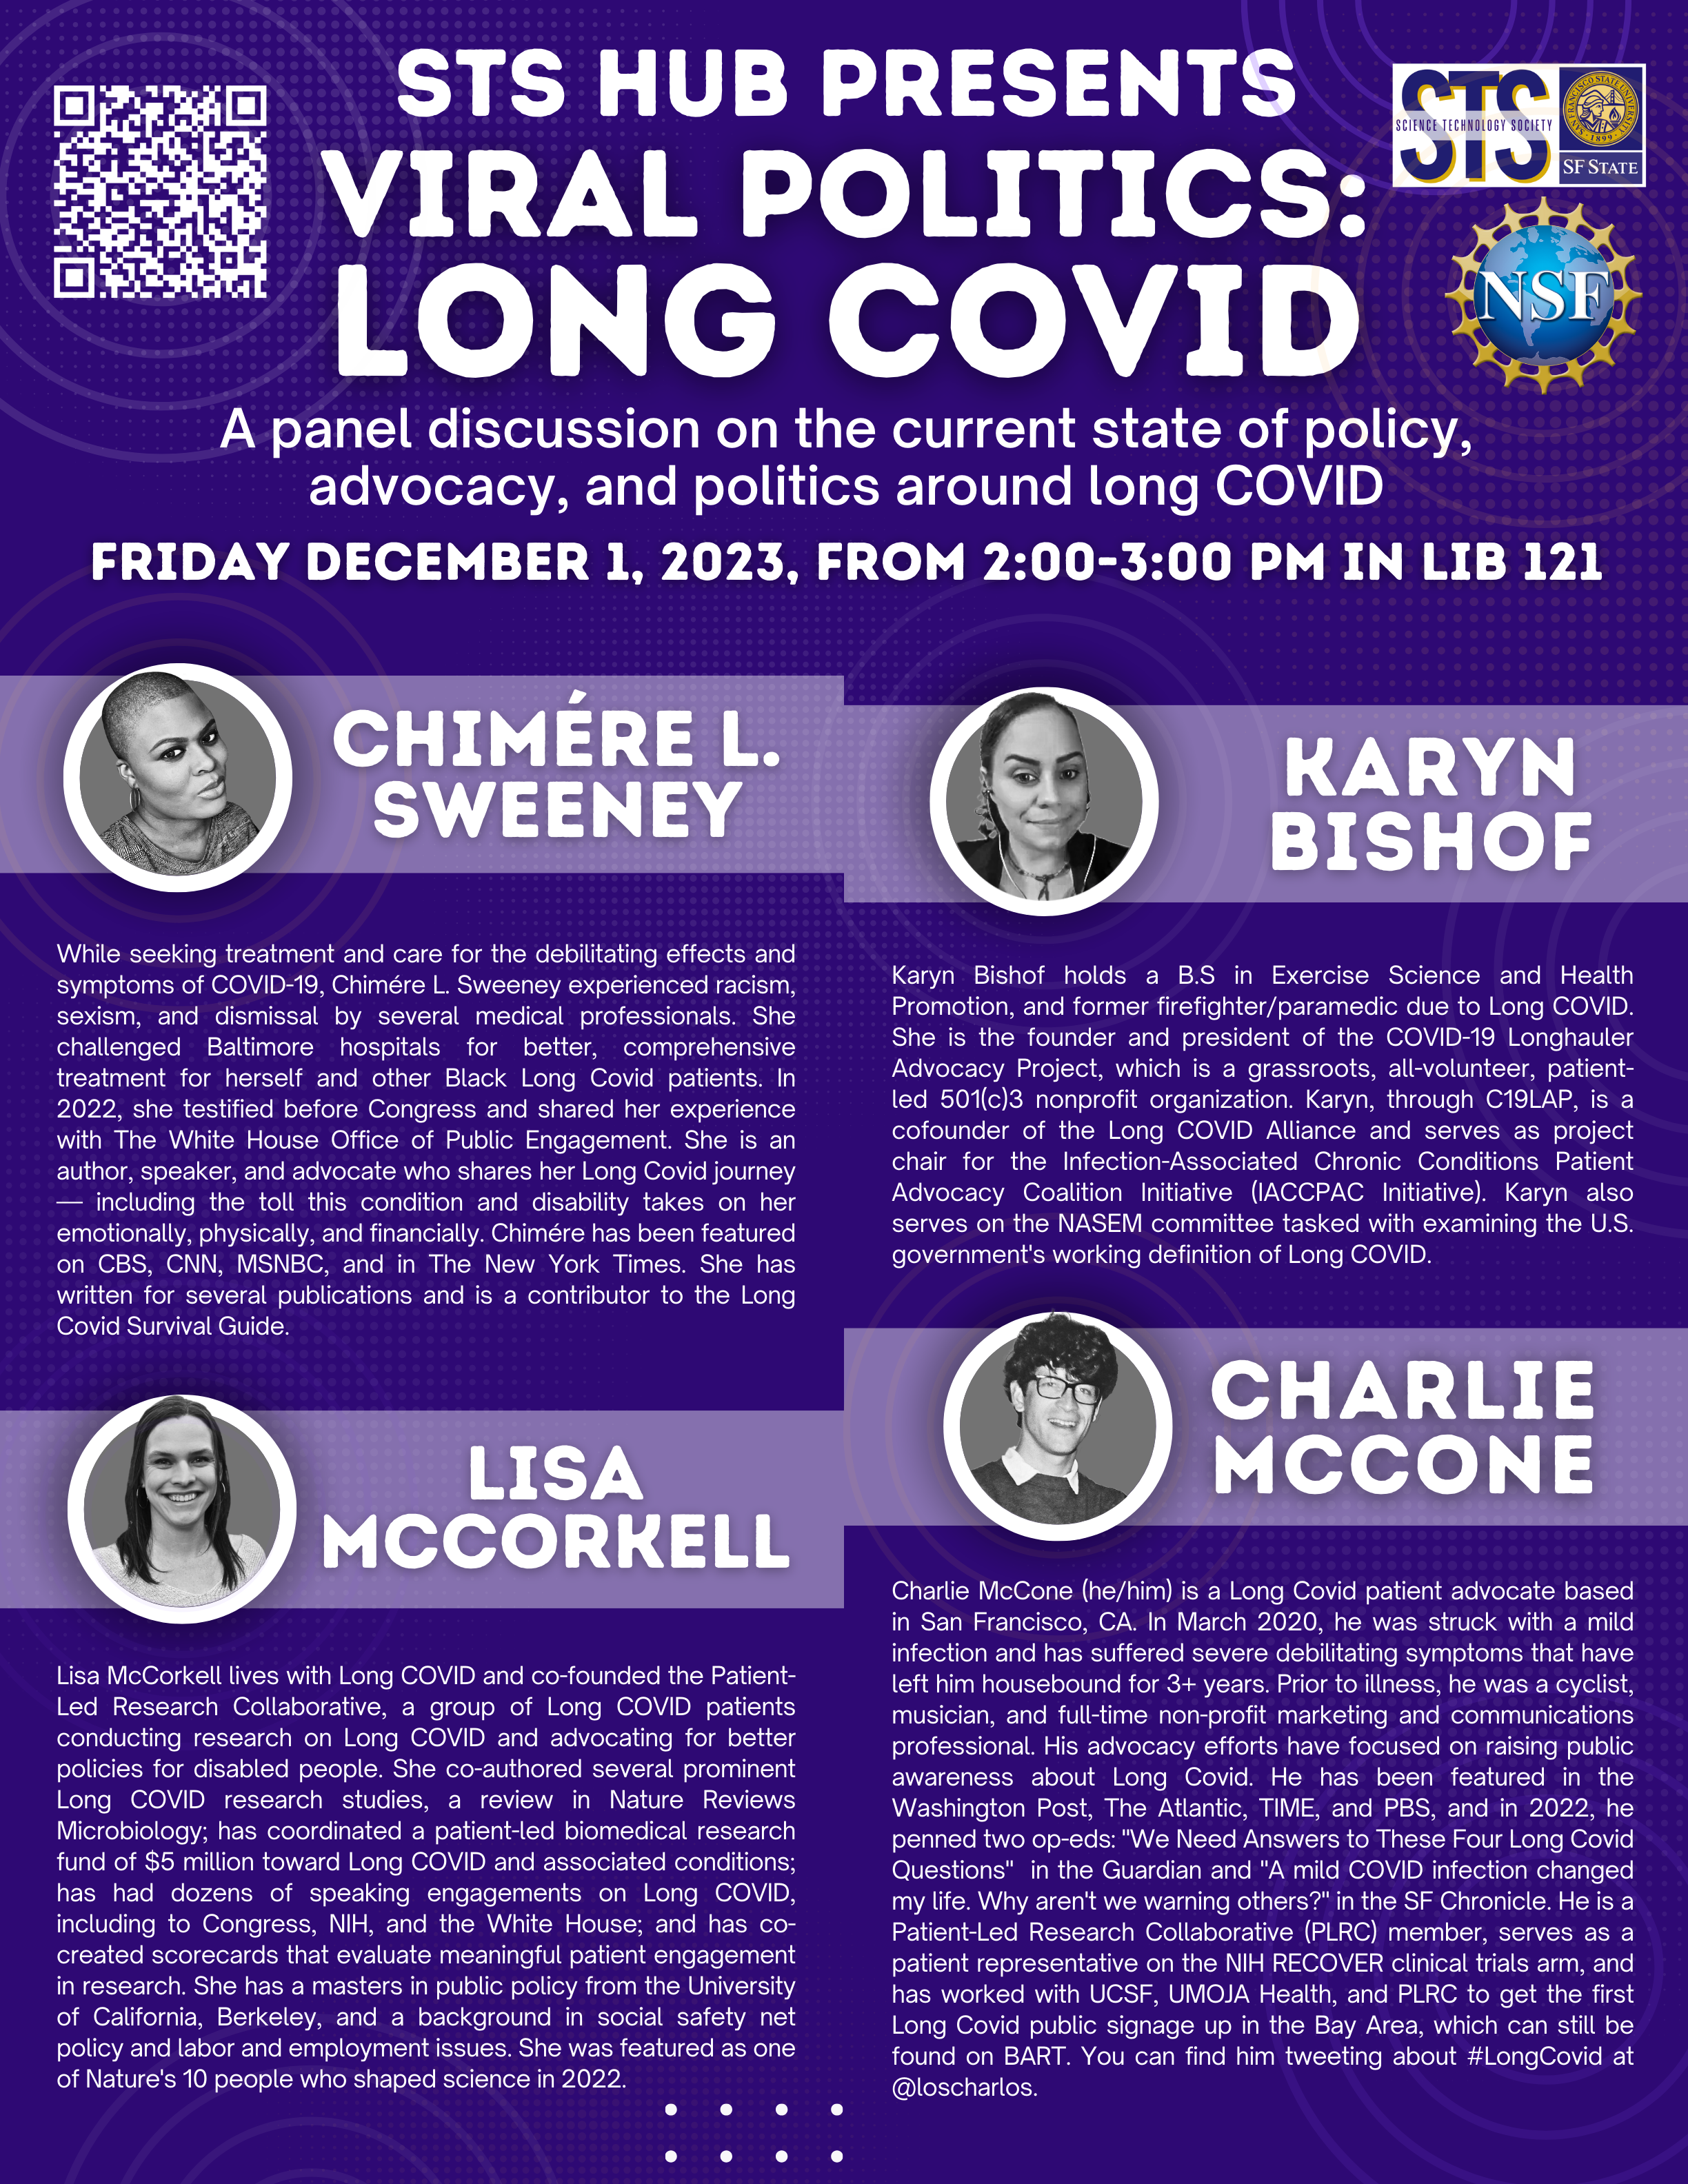 A flyer advertising Viral Politics, a panel talk about Long Covid